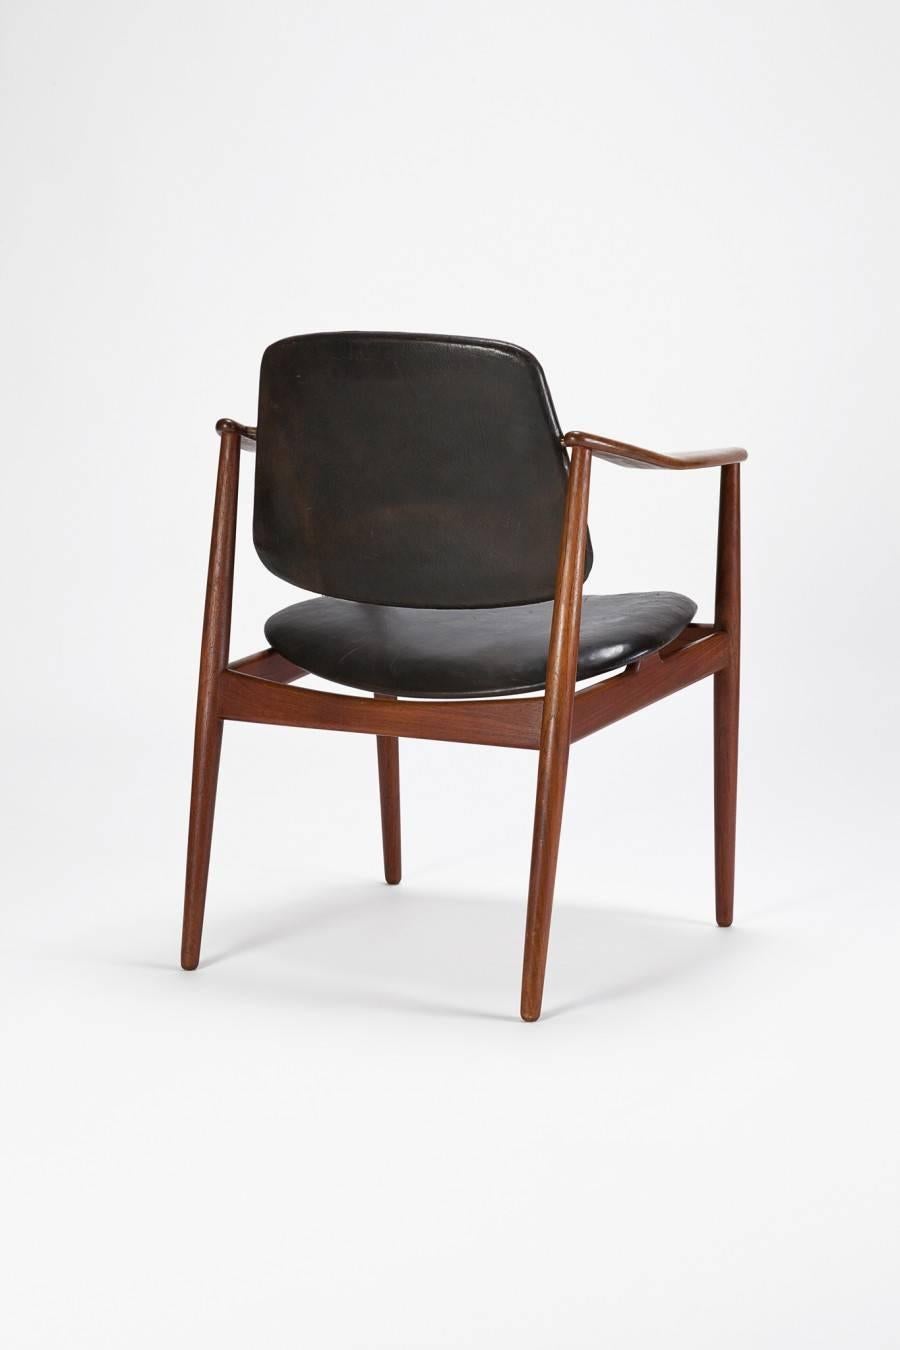 50s chair